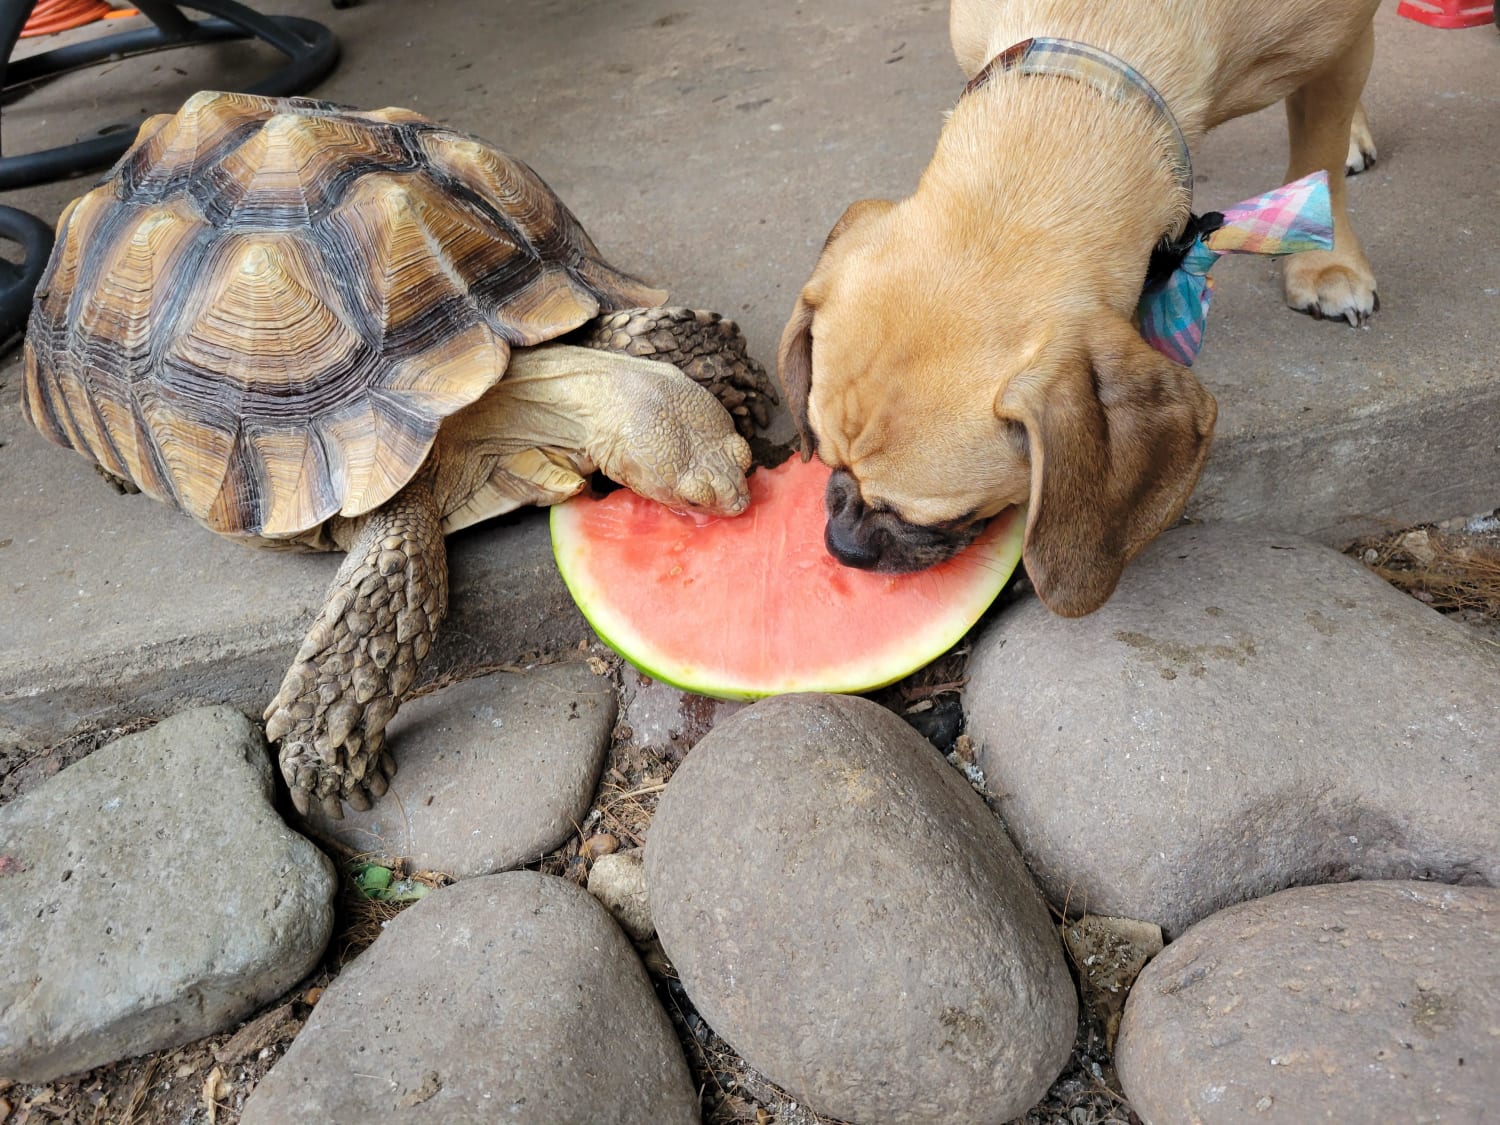 Bongo and Rooster sharing some watermelon